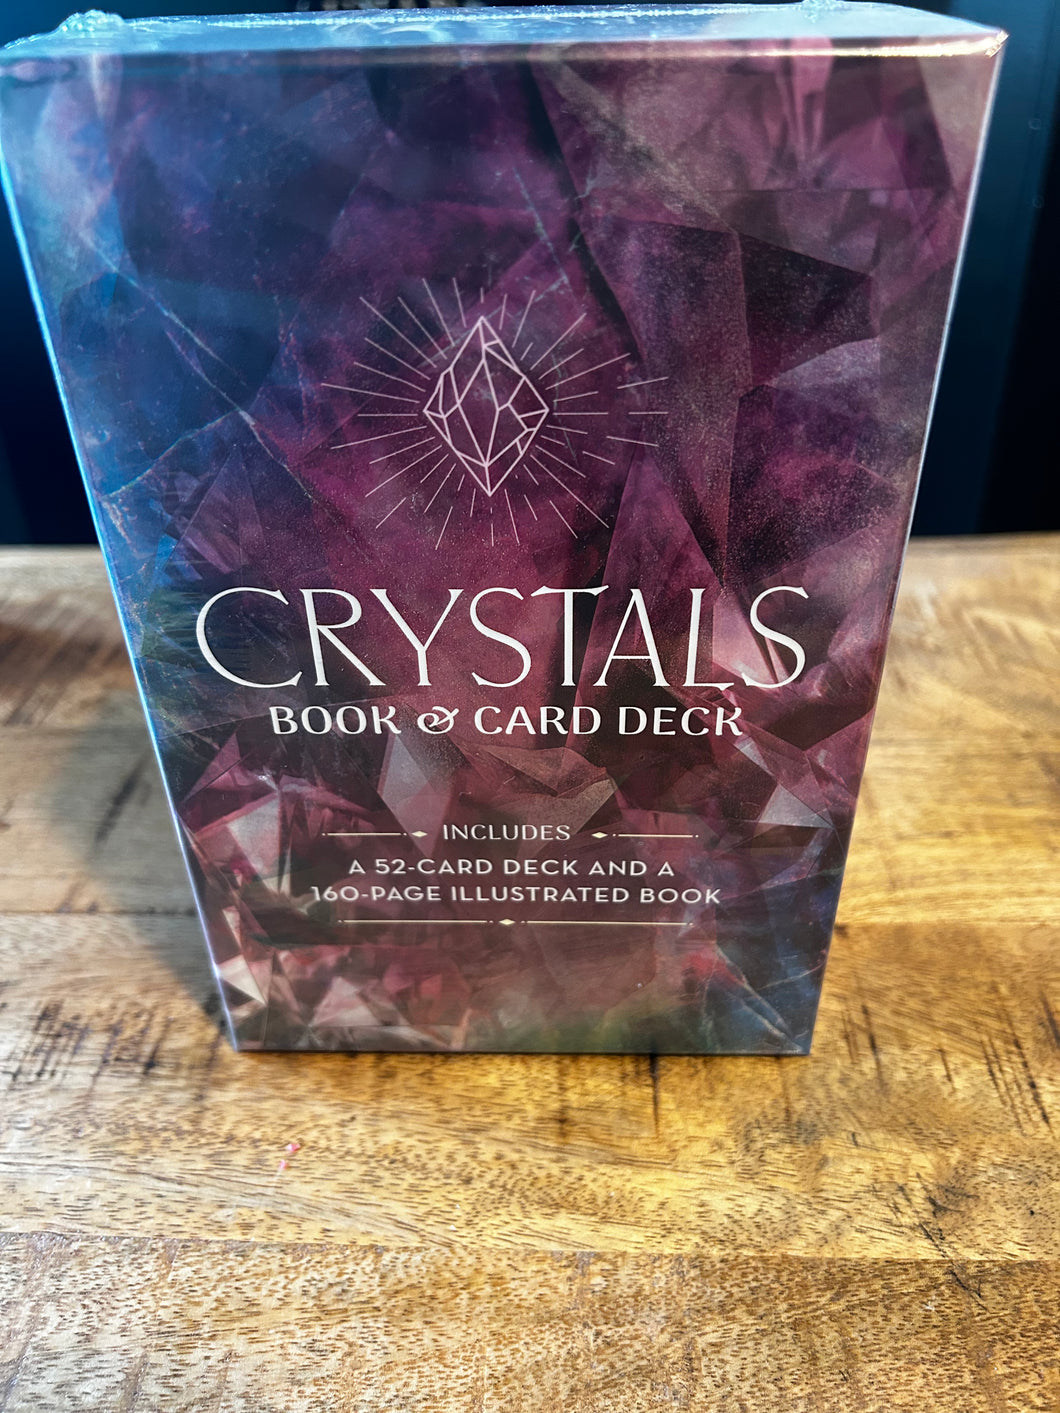 Crystals book and card deck